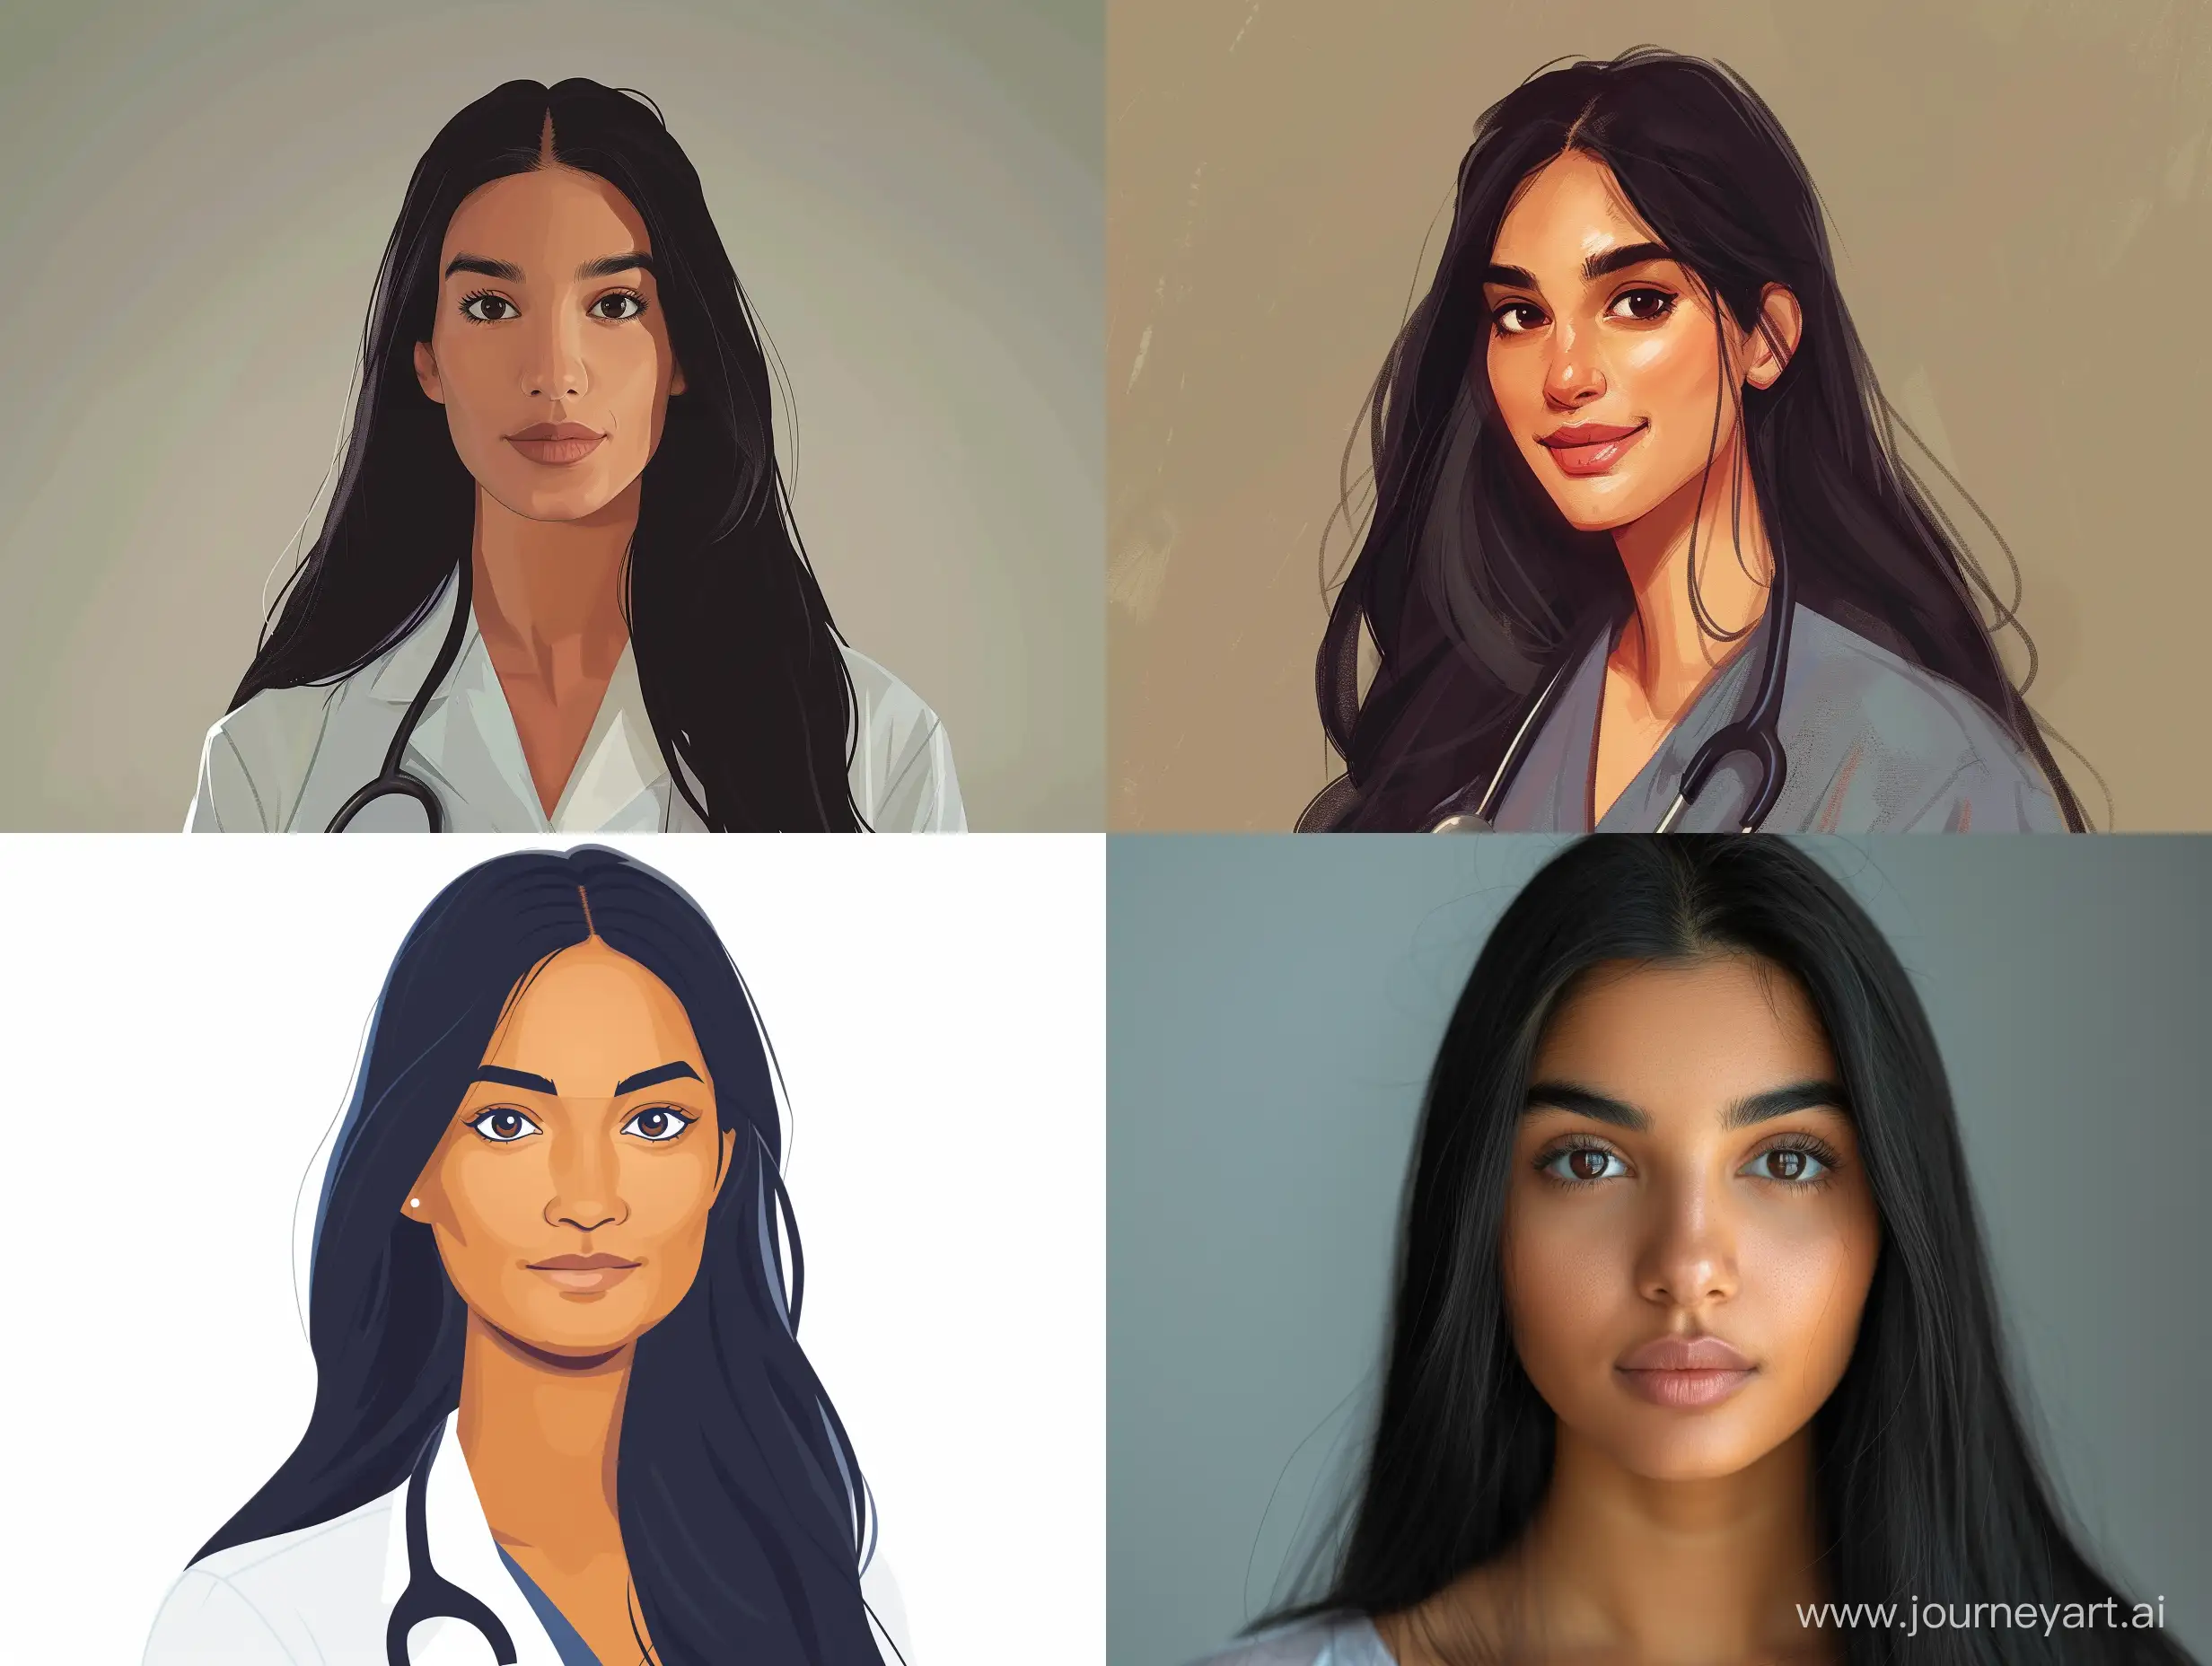 Young-Female-Doctor-with-Long-Black-Hair-in-Complete-Image